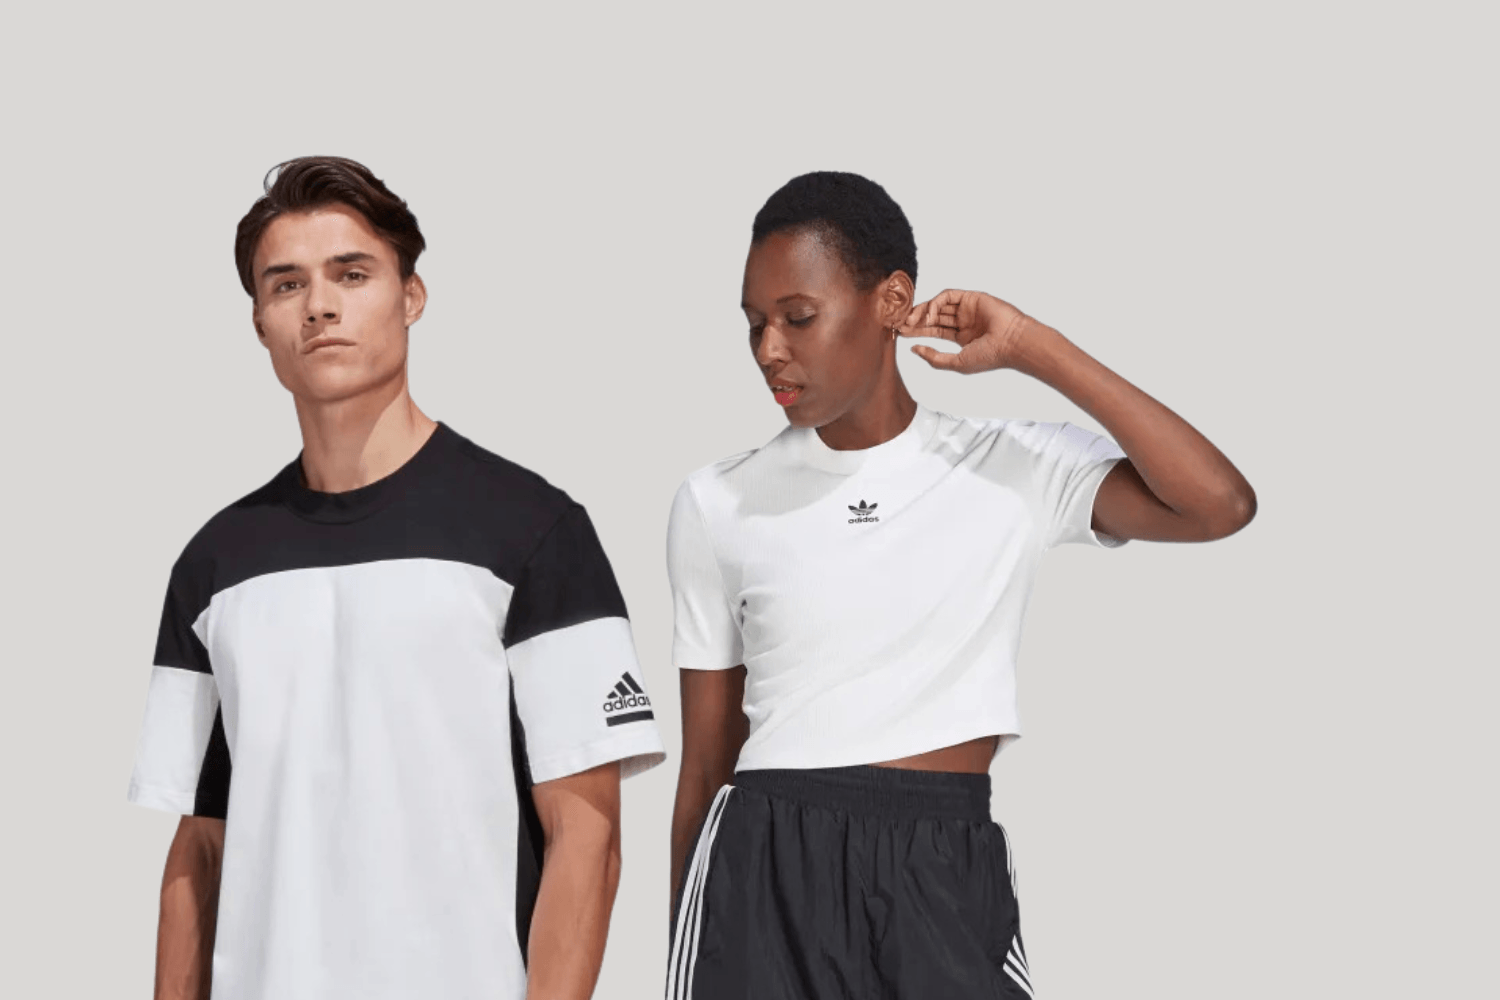 Get ready for summer with adidas!